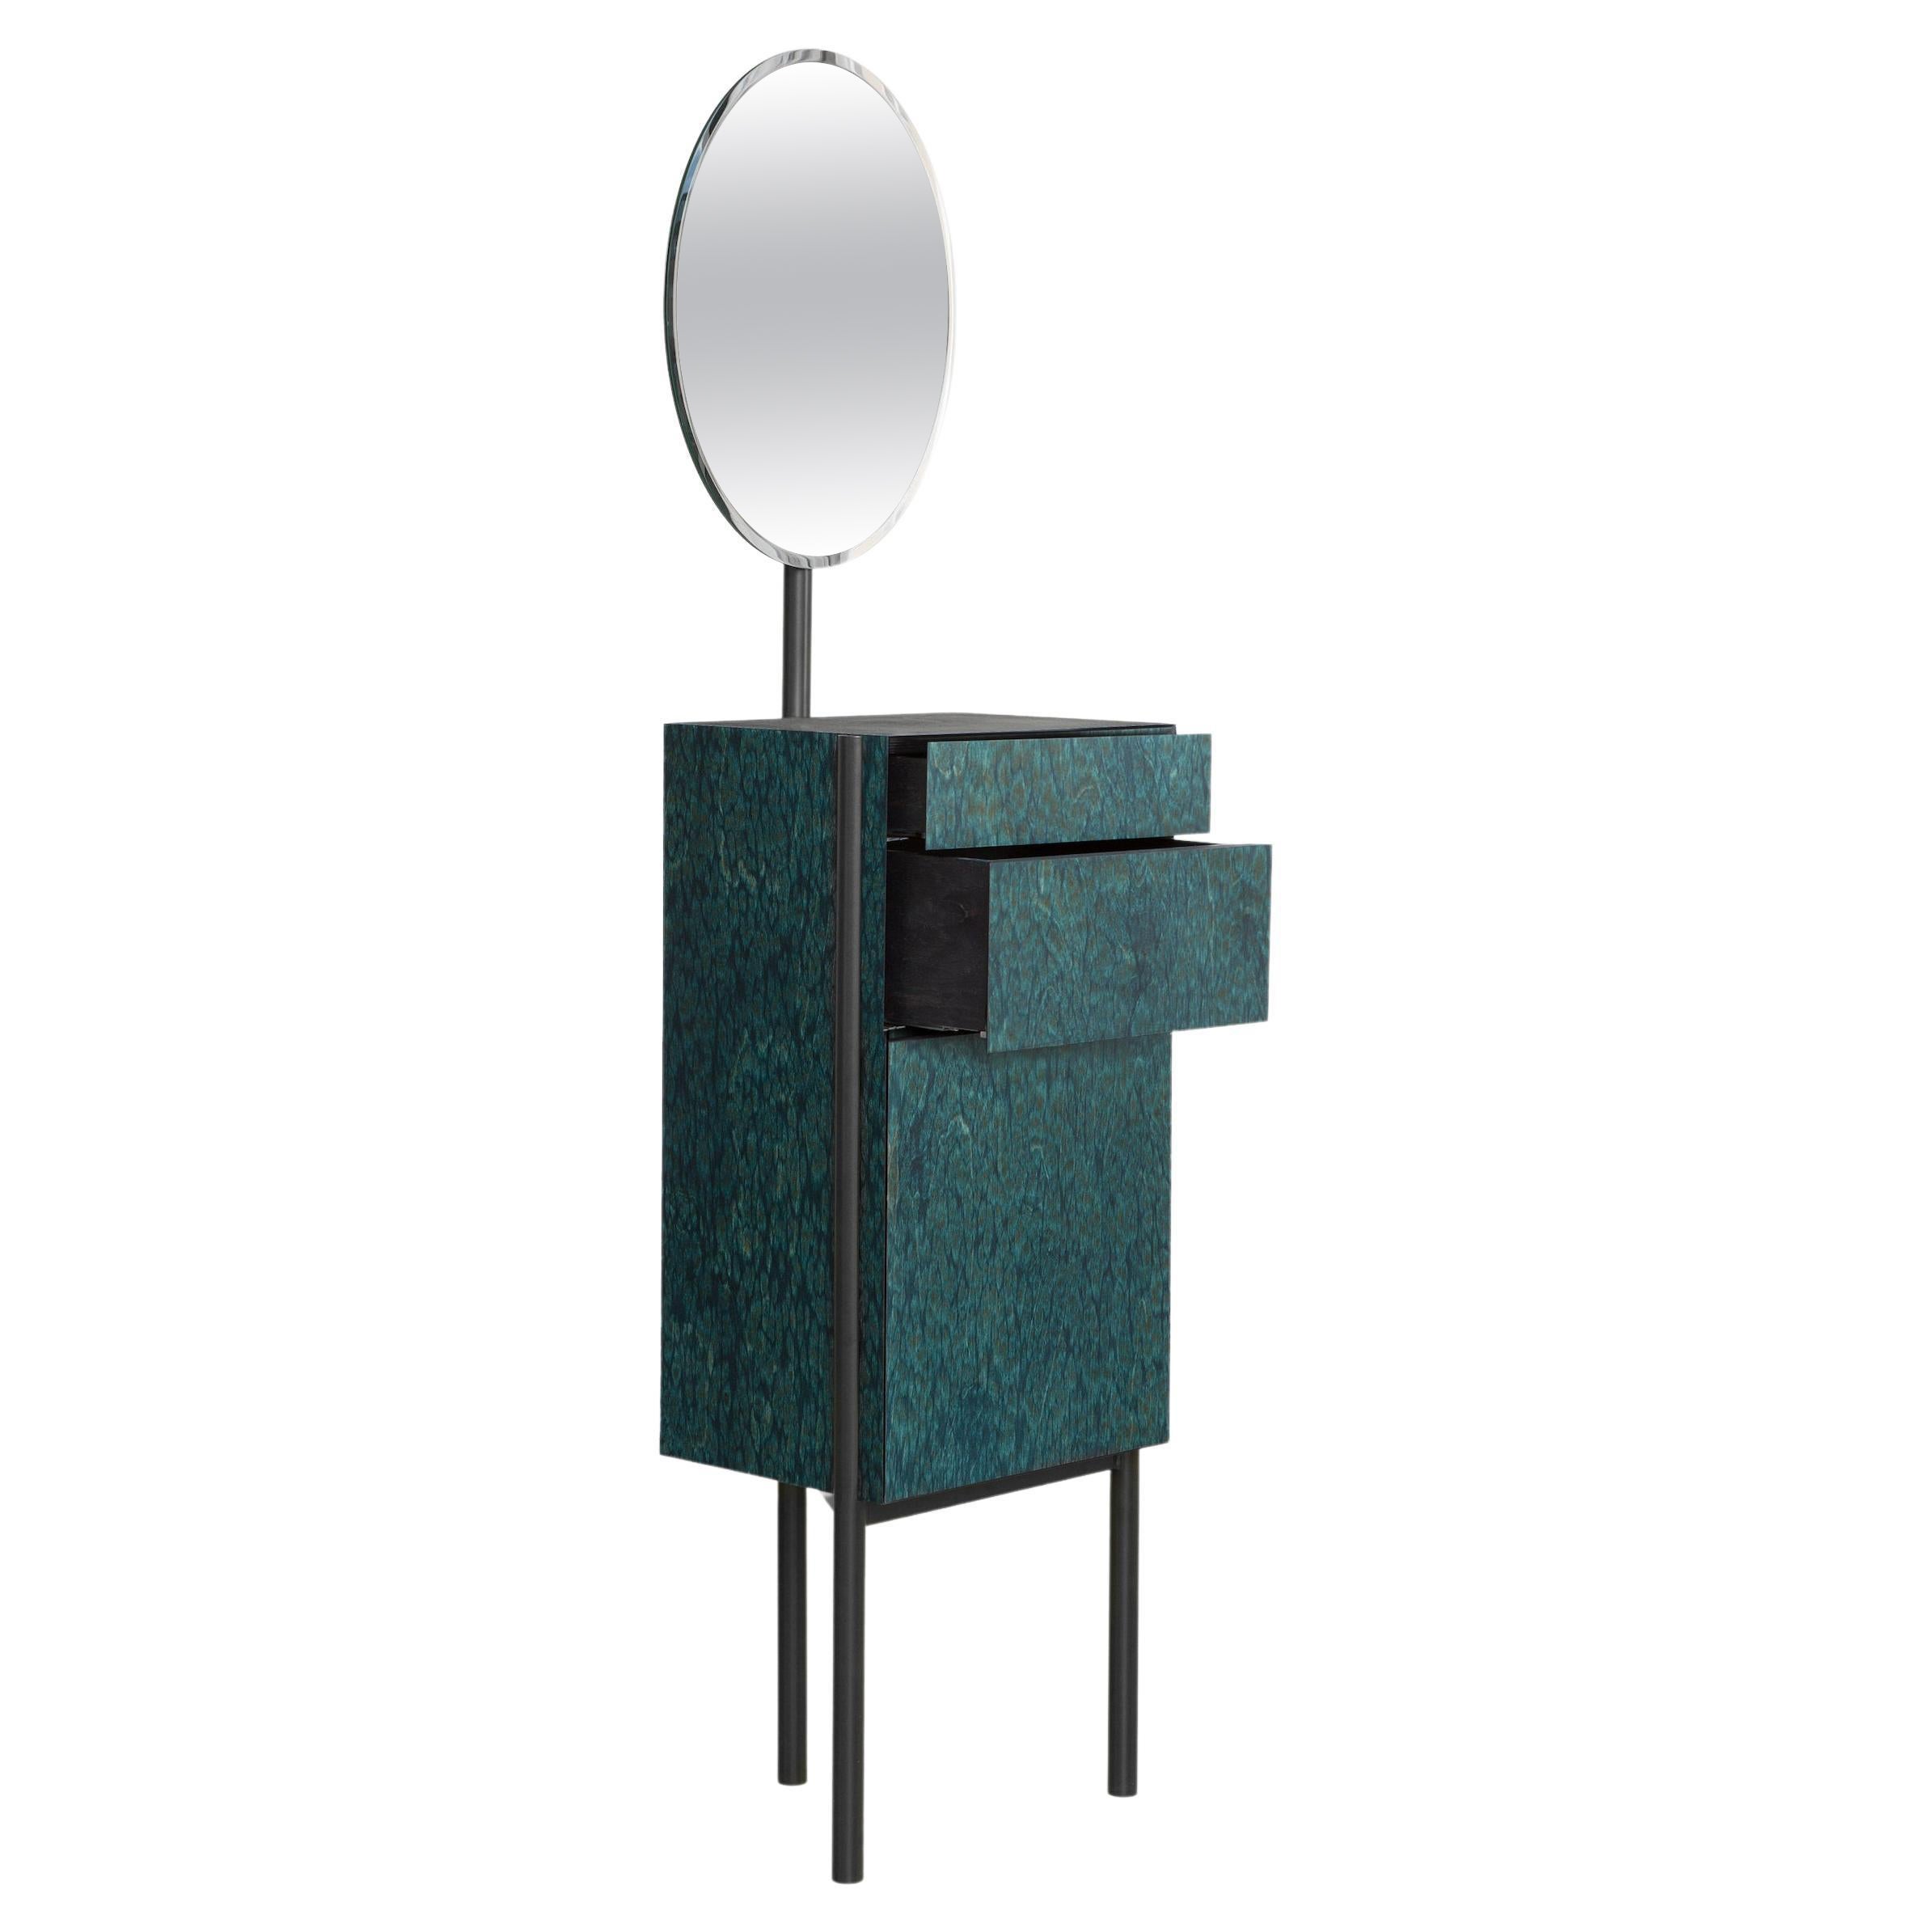 Osis Karla Mirror / Side Table by Llot Llov For Sale